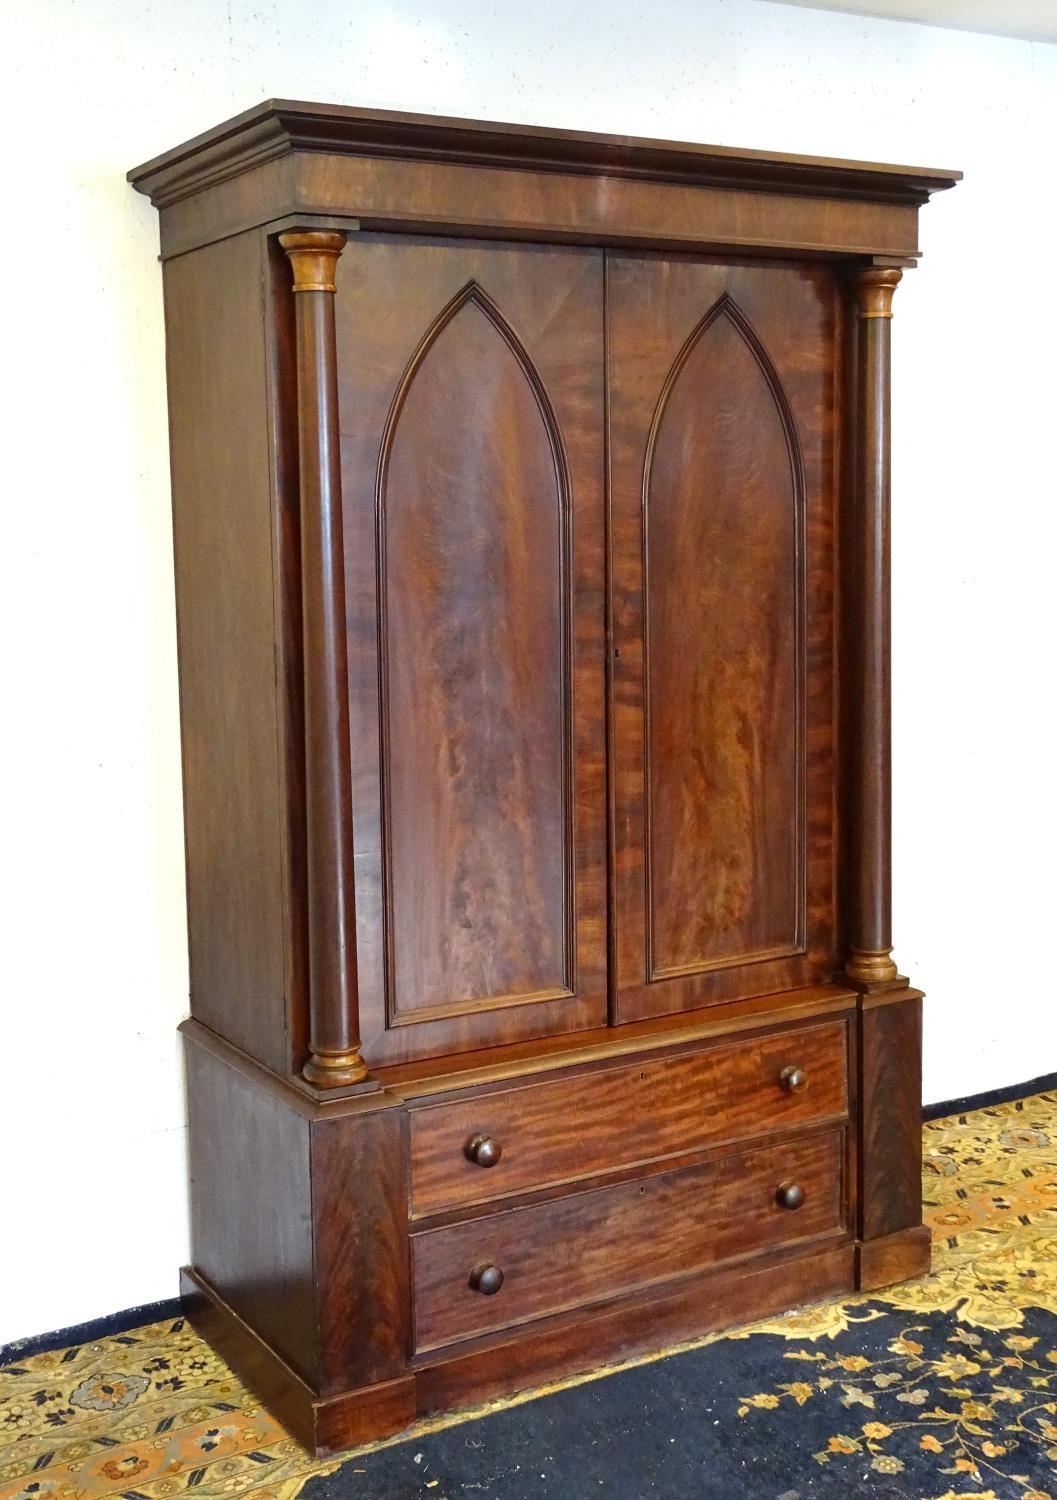 A 19thC mahogany press with a moulded cornice above two large doors with lancet shaped panelling,